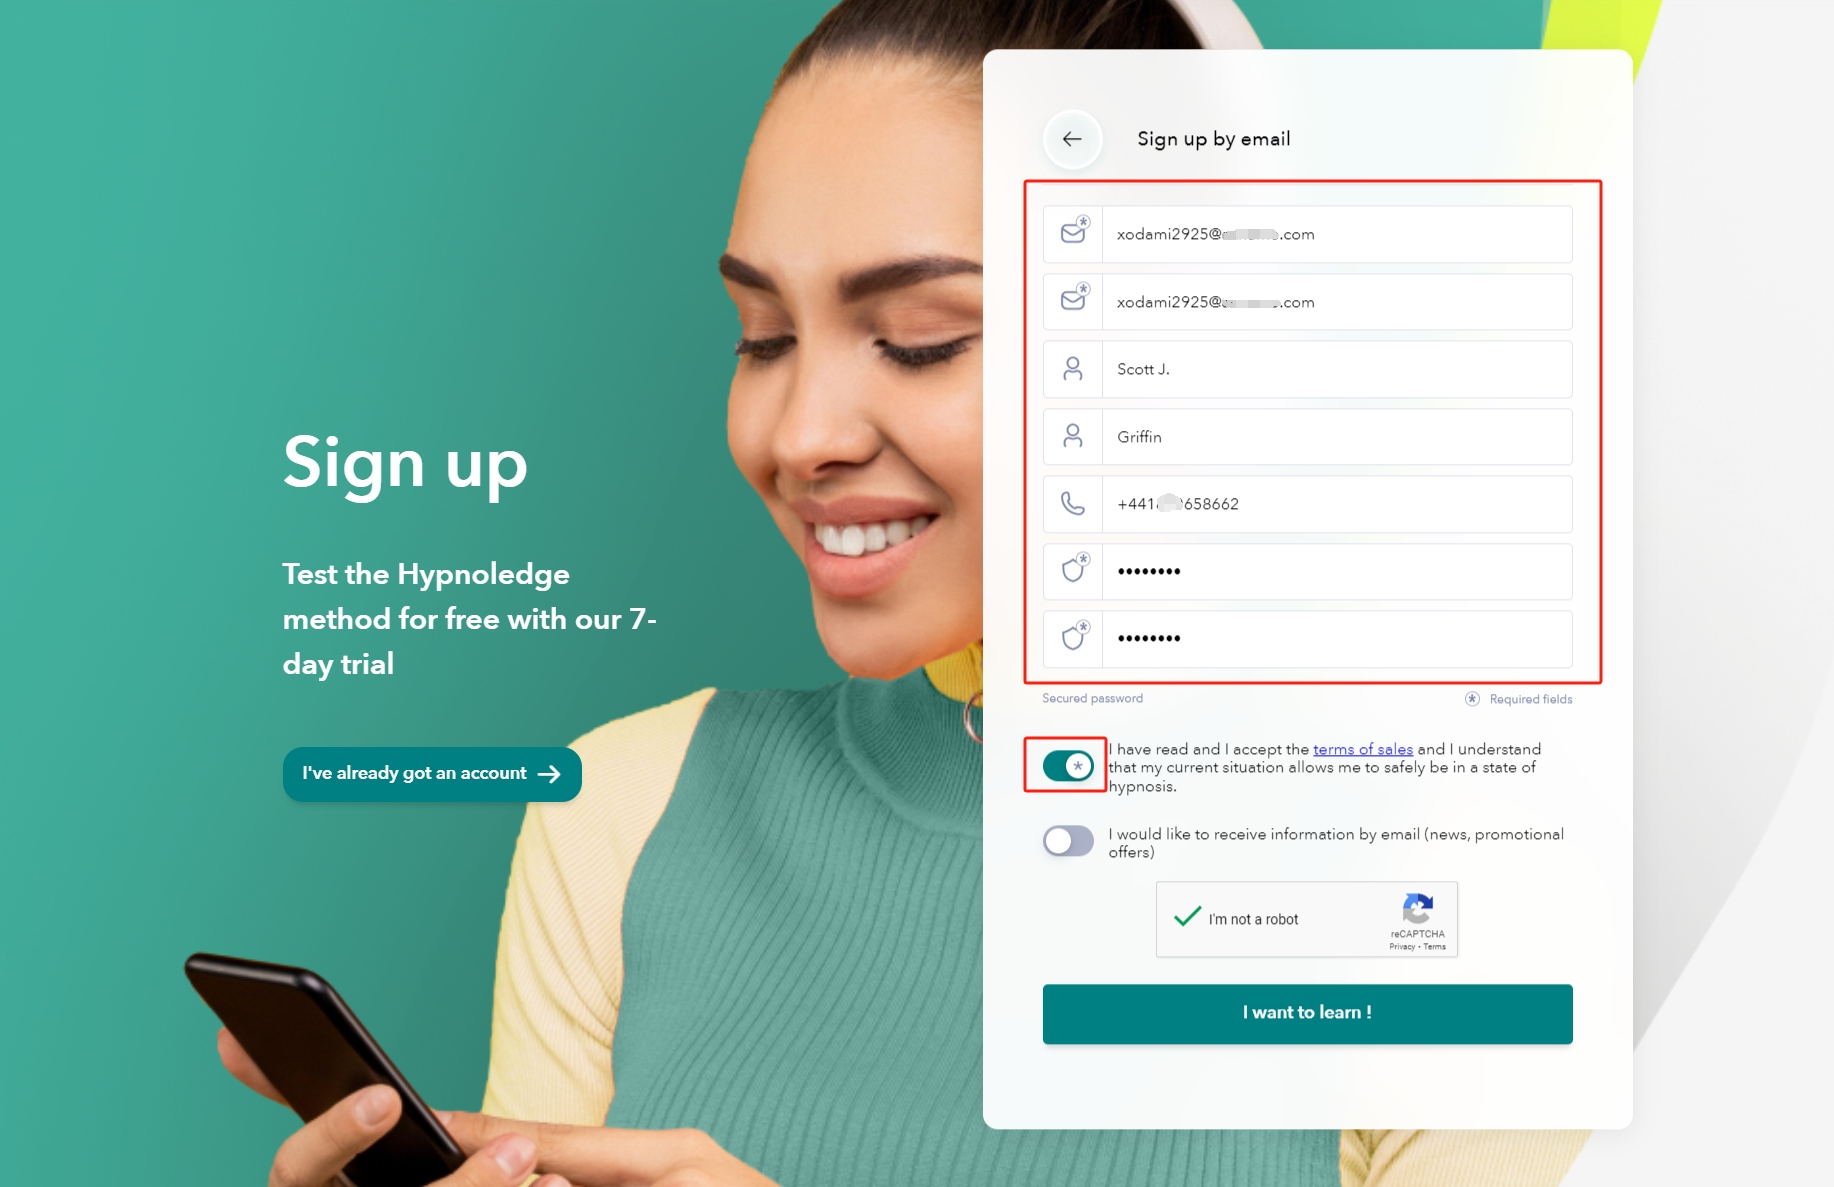 fill-up-information-to-sign-up-hypnoledge